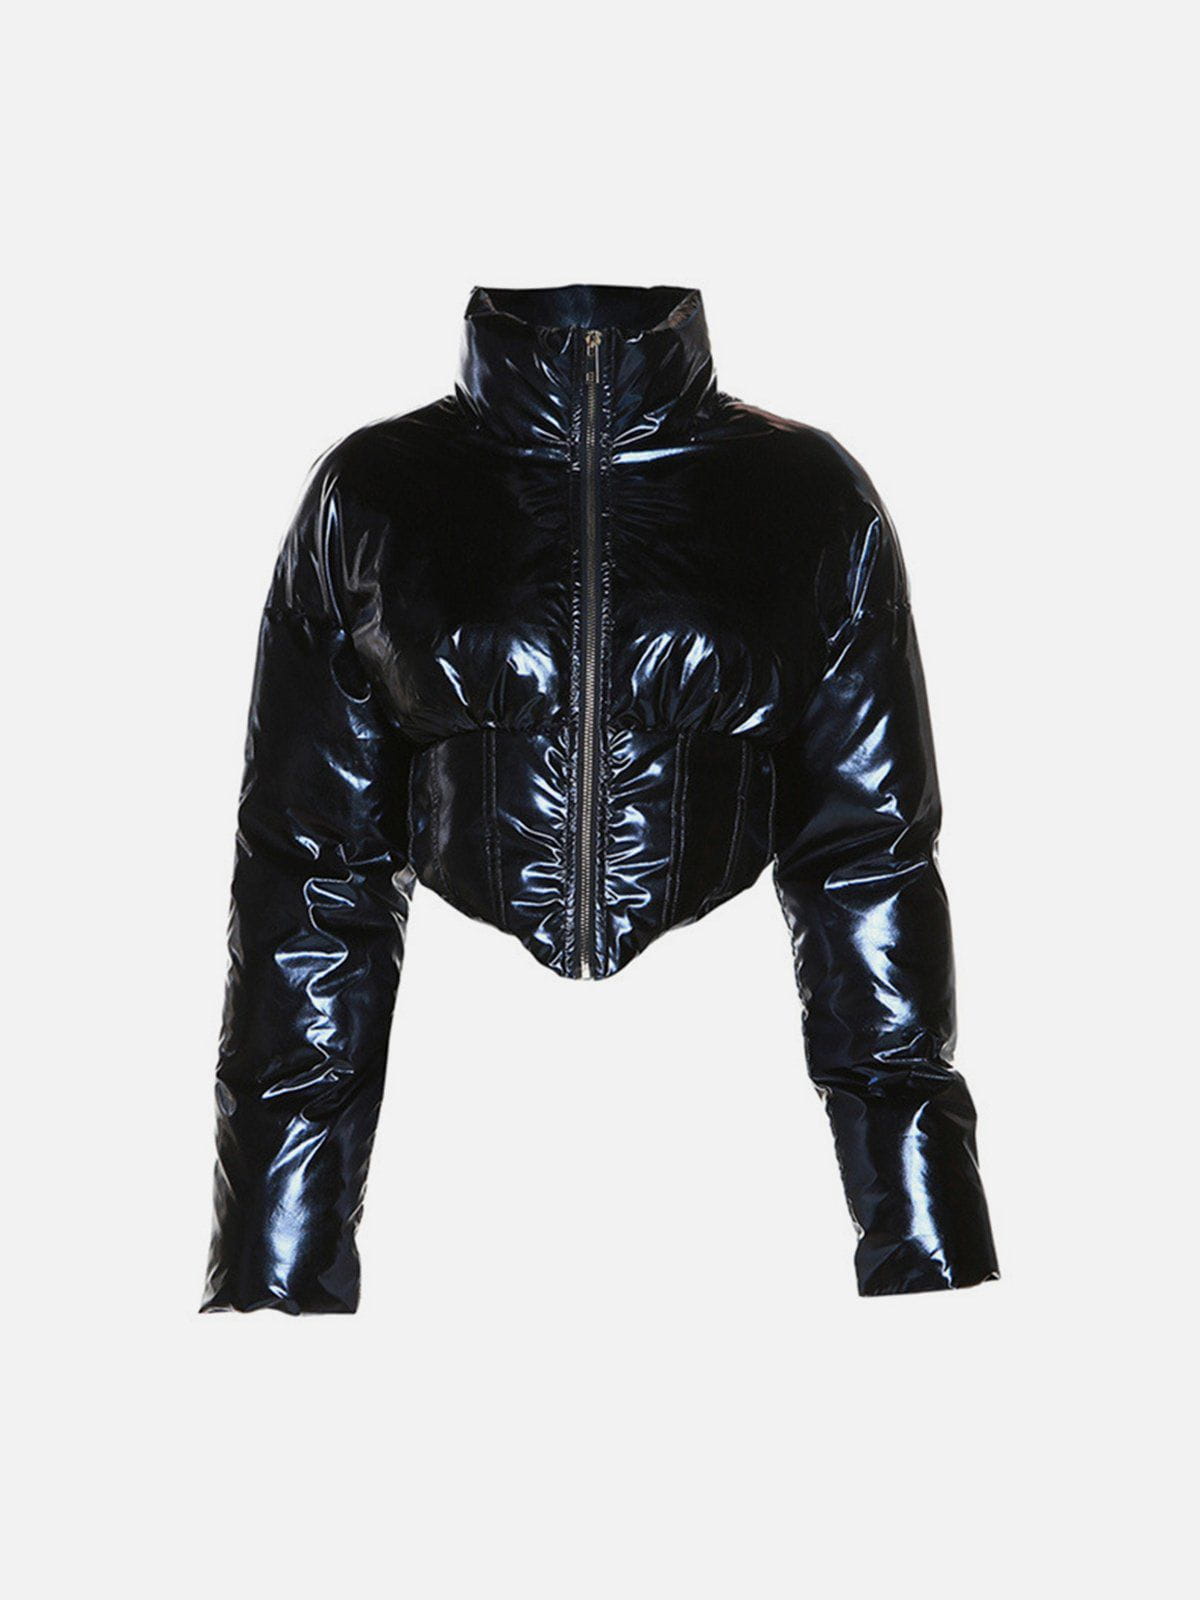 Eprezzy® - Solid Color Gloss Water Resistant Short Winter Coat Streetwear Fashion - eprezzy.com